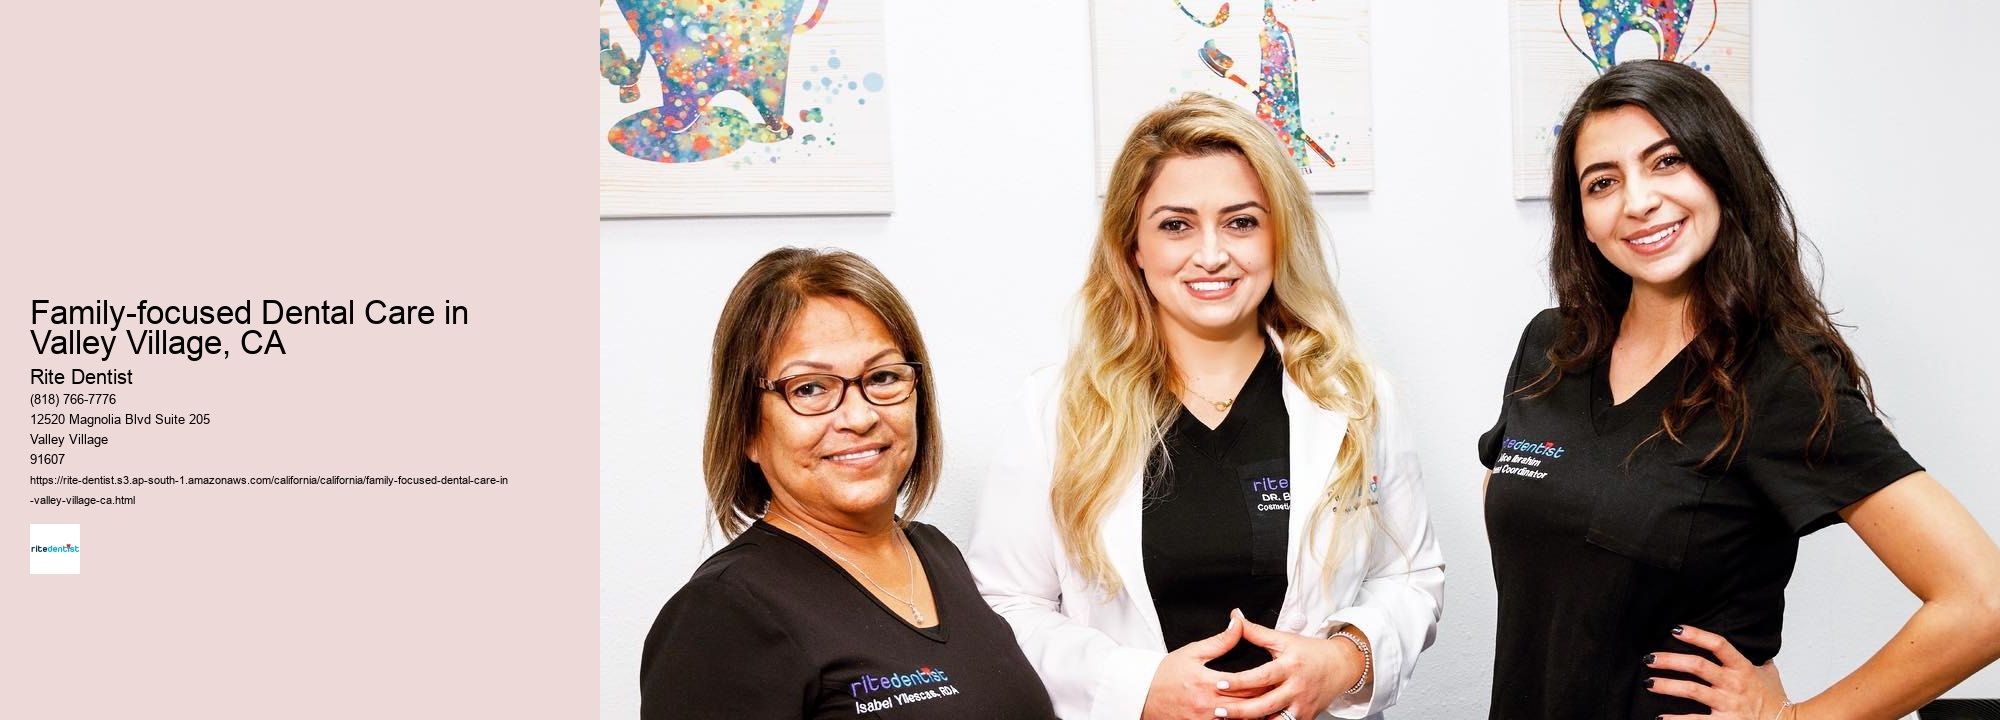 Family-focused Dental Care in Valley Village, CA